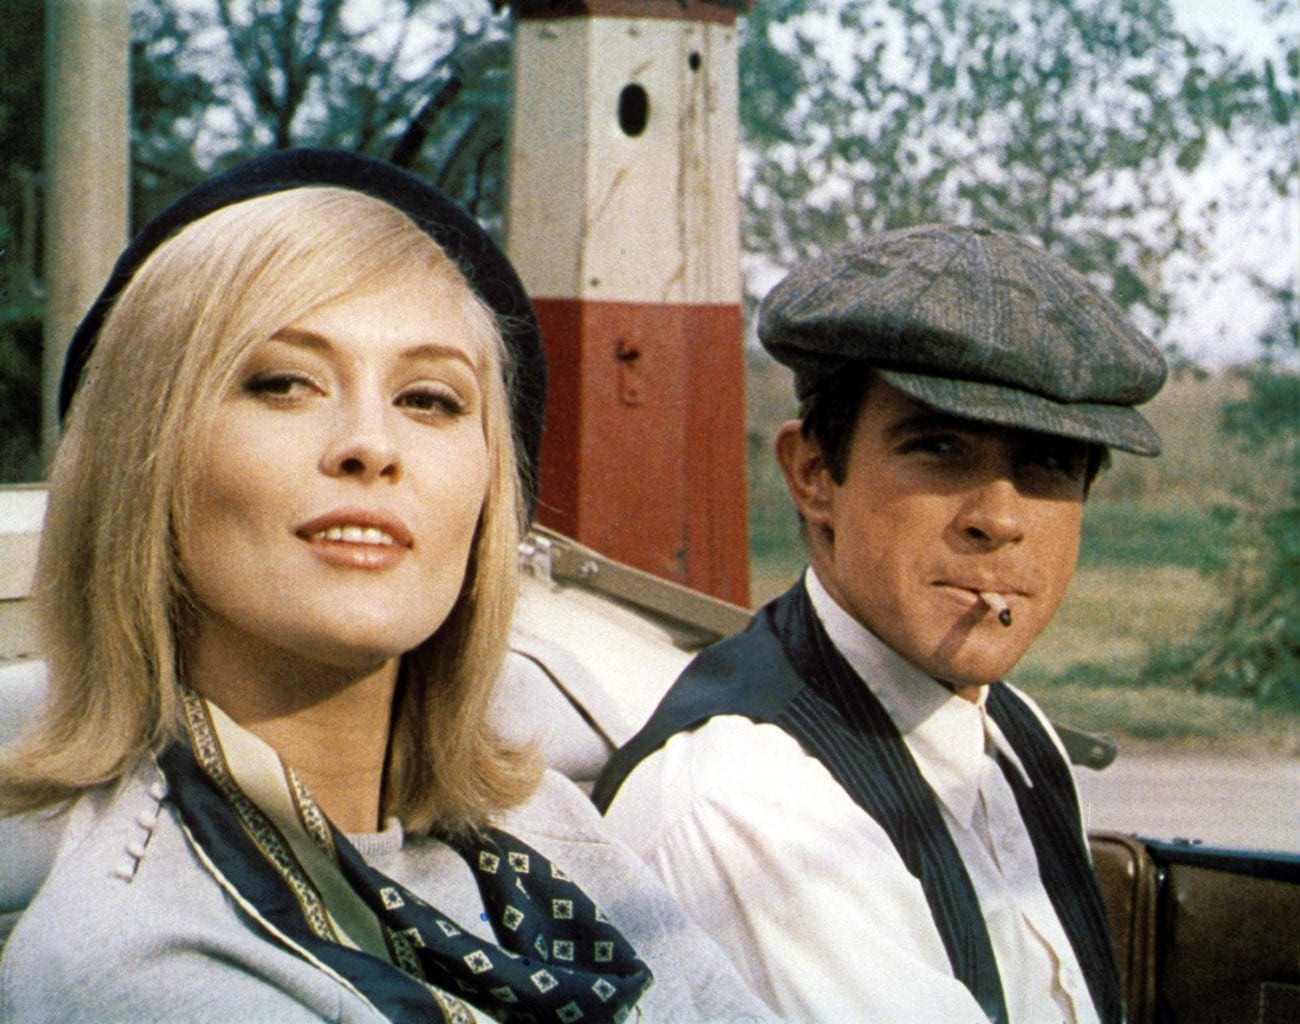 Next time you’re planning a road trip, try this list of Bonnie and Clyde movies. They'll be sure to tickle your vintage true crime fancy.